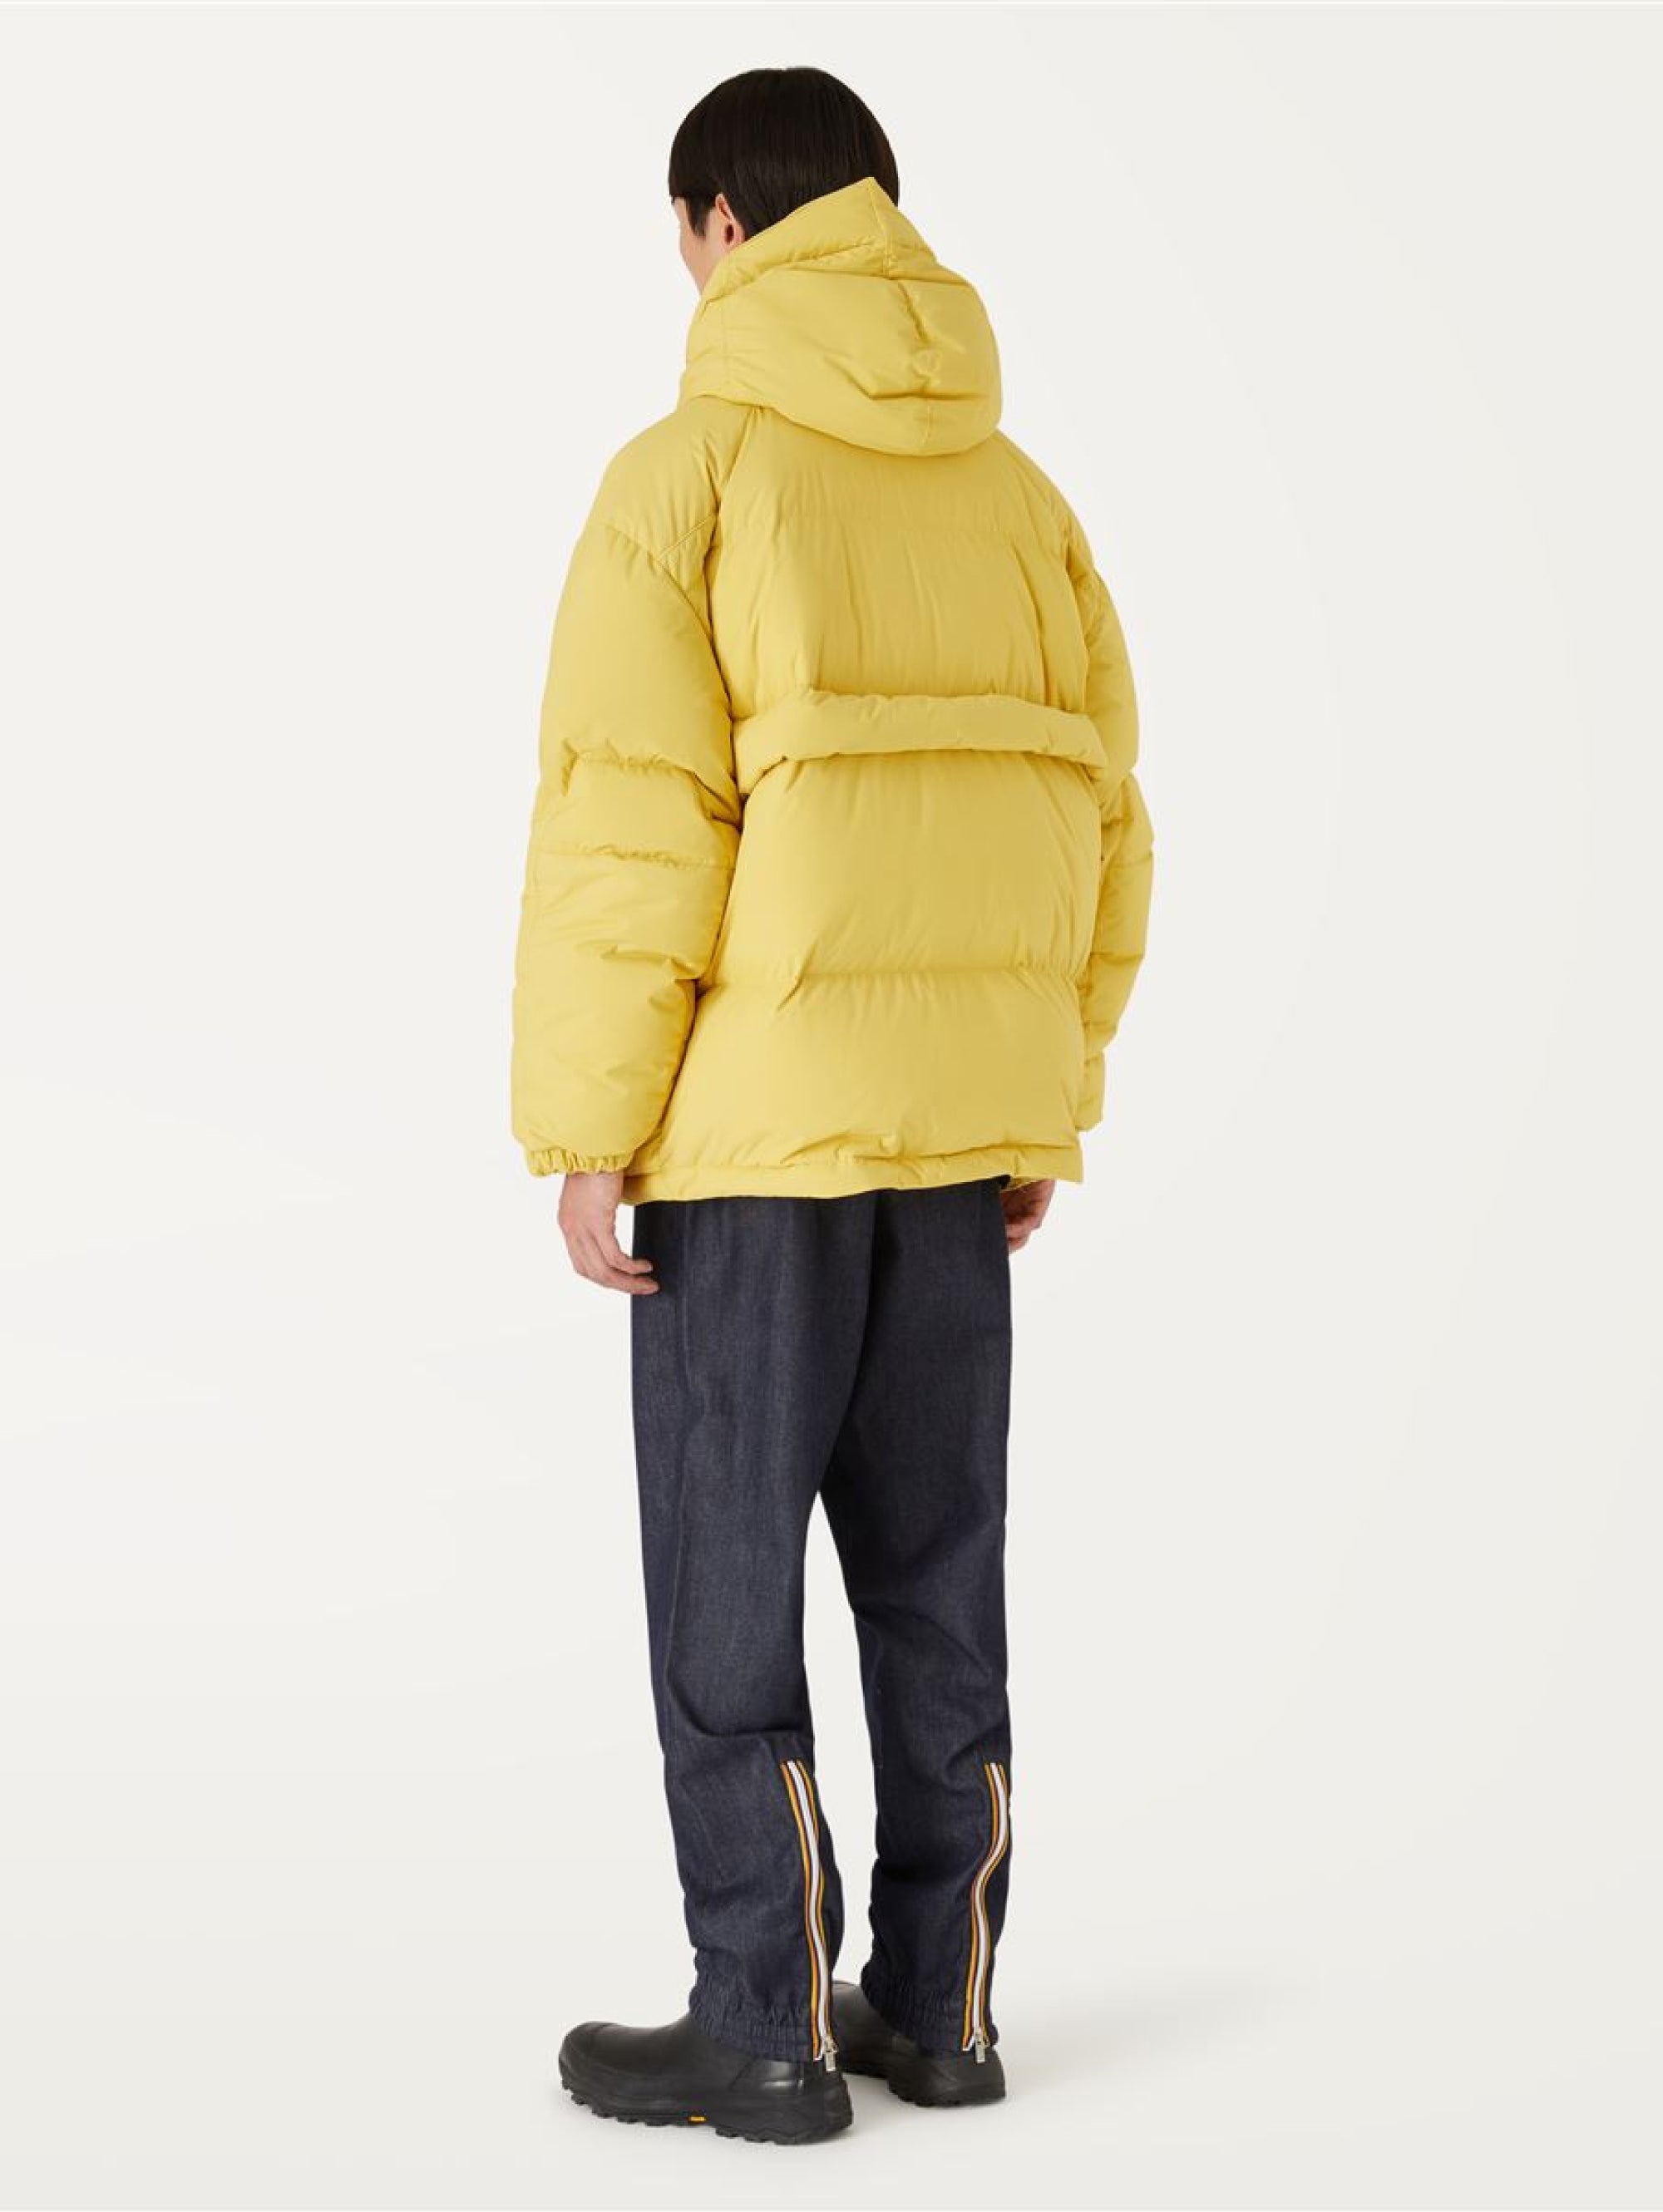 Jacket in Recycled Nylon with Yellow Hood